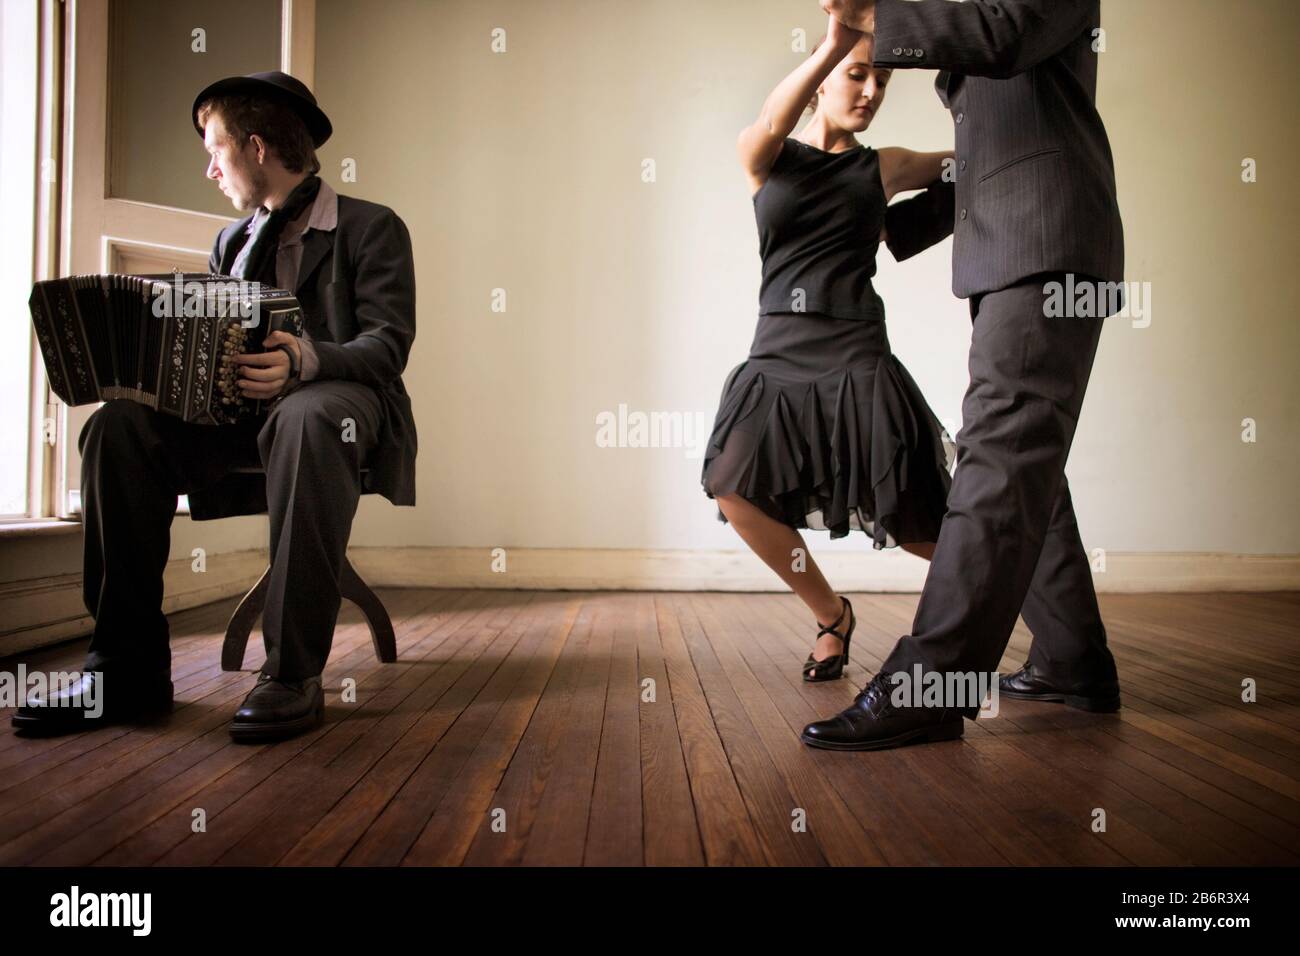 Side view of two people dancing as a man plays harmonium. Stock Photo